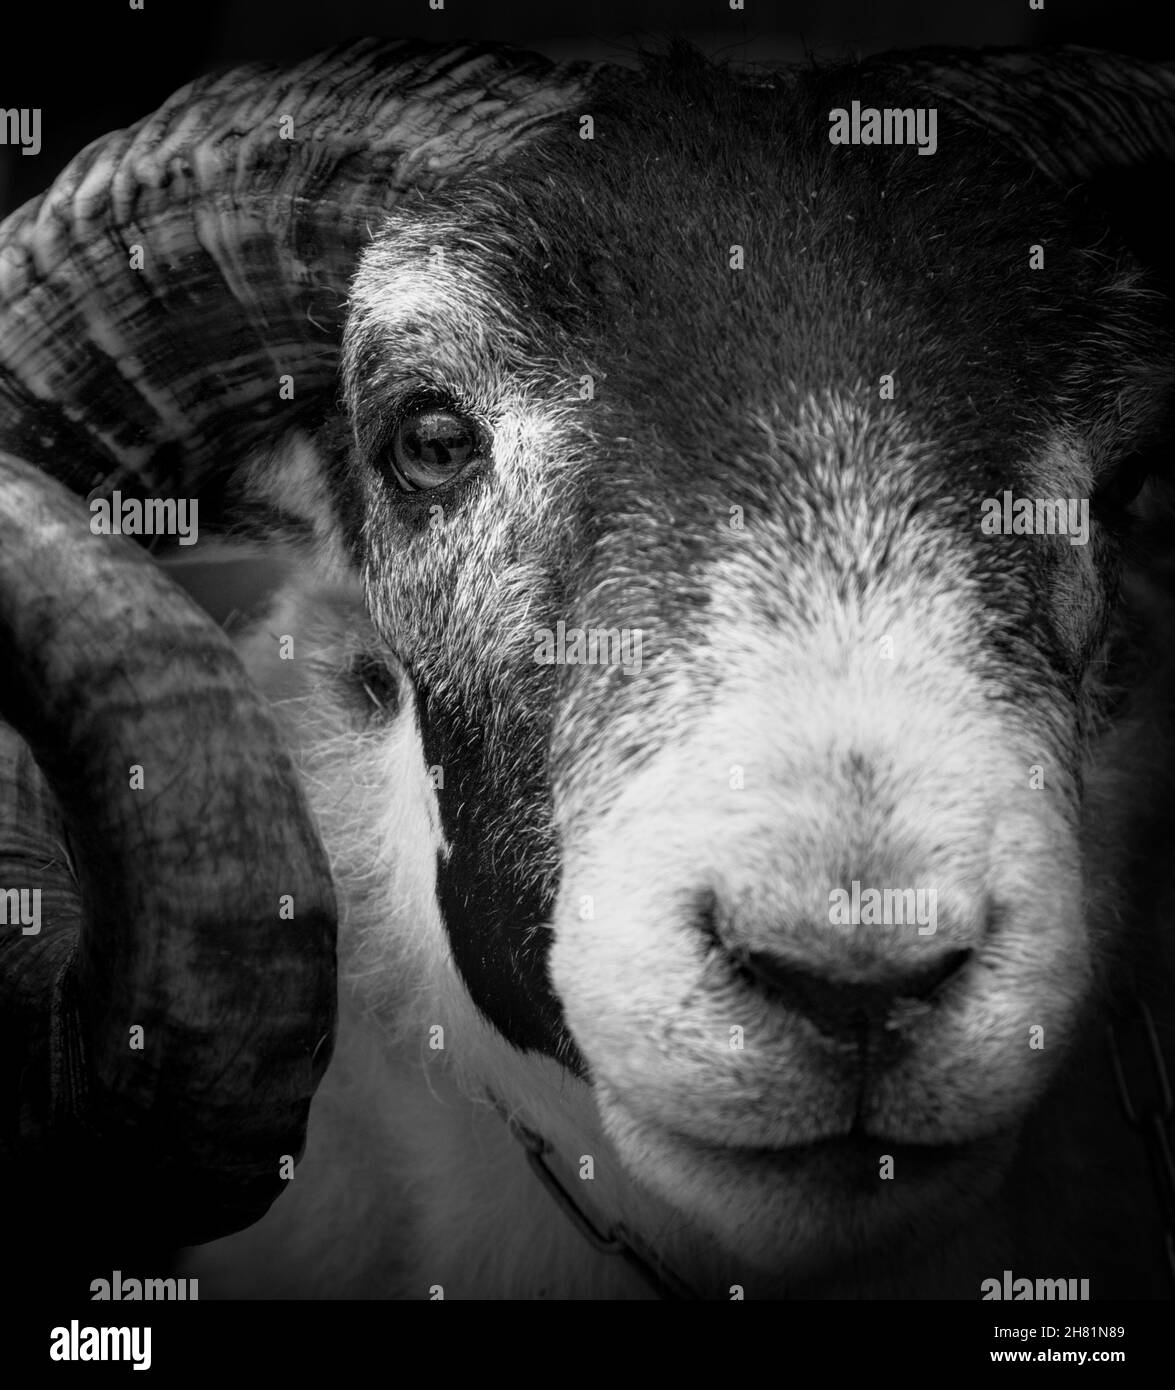 Black and White Portrait Of A British Blackface Ram With Curly Horns With Selective Focus On The Eye, UK Stock Photo